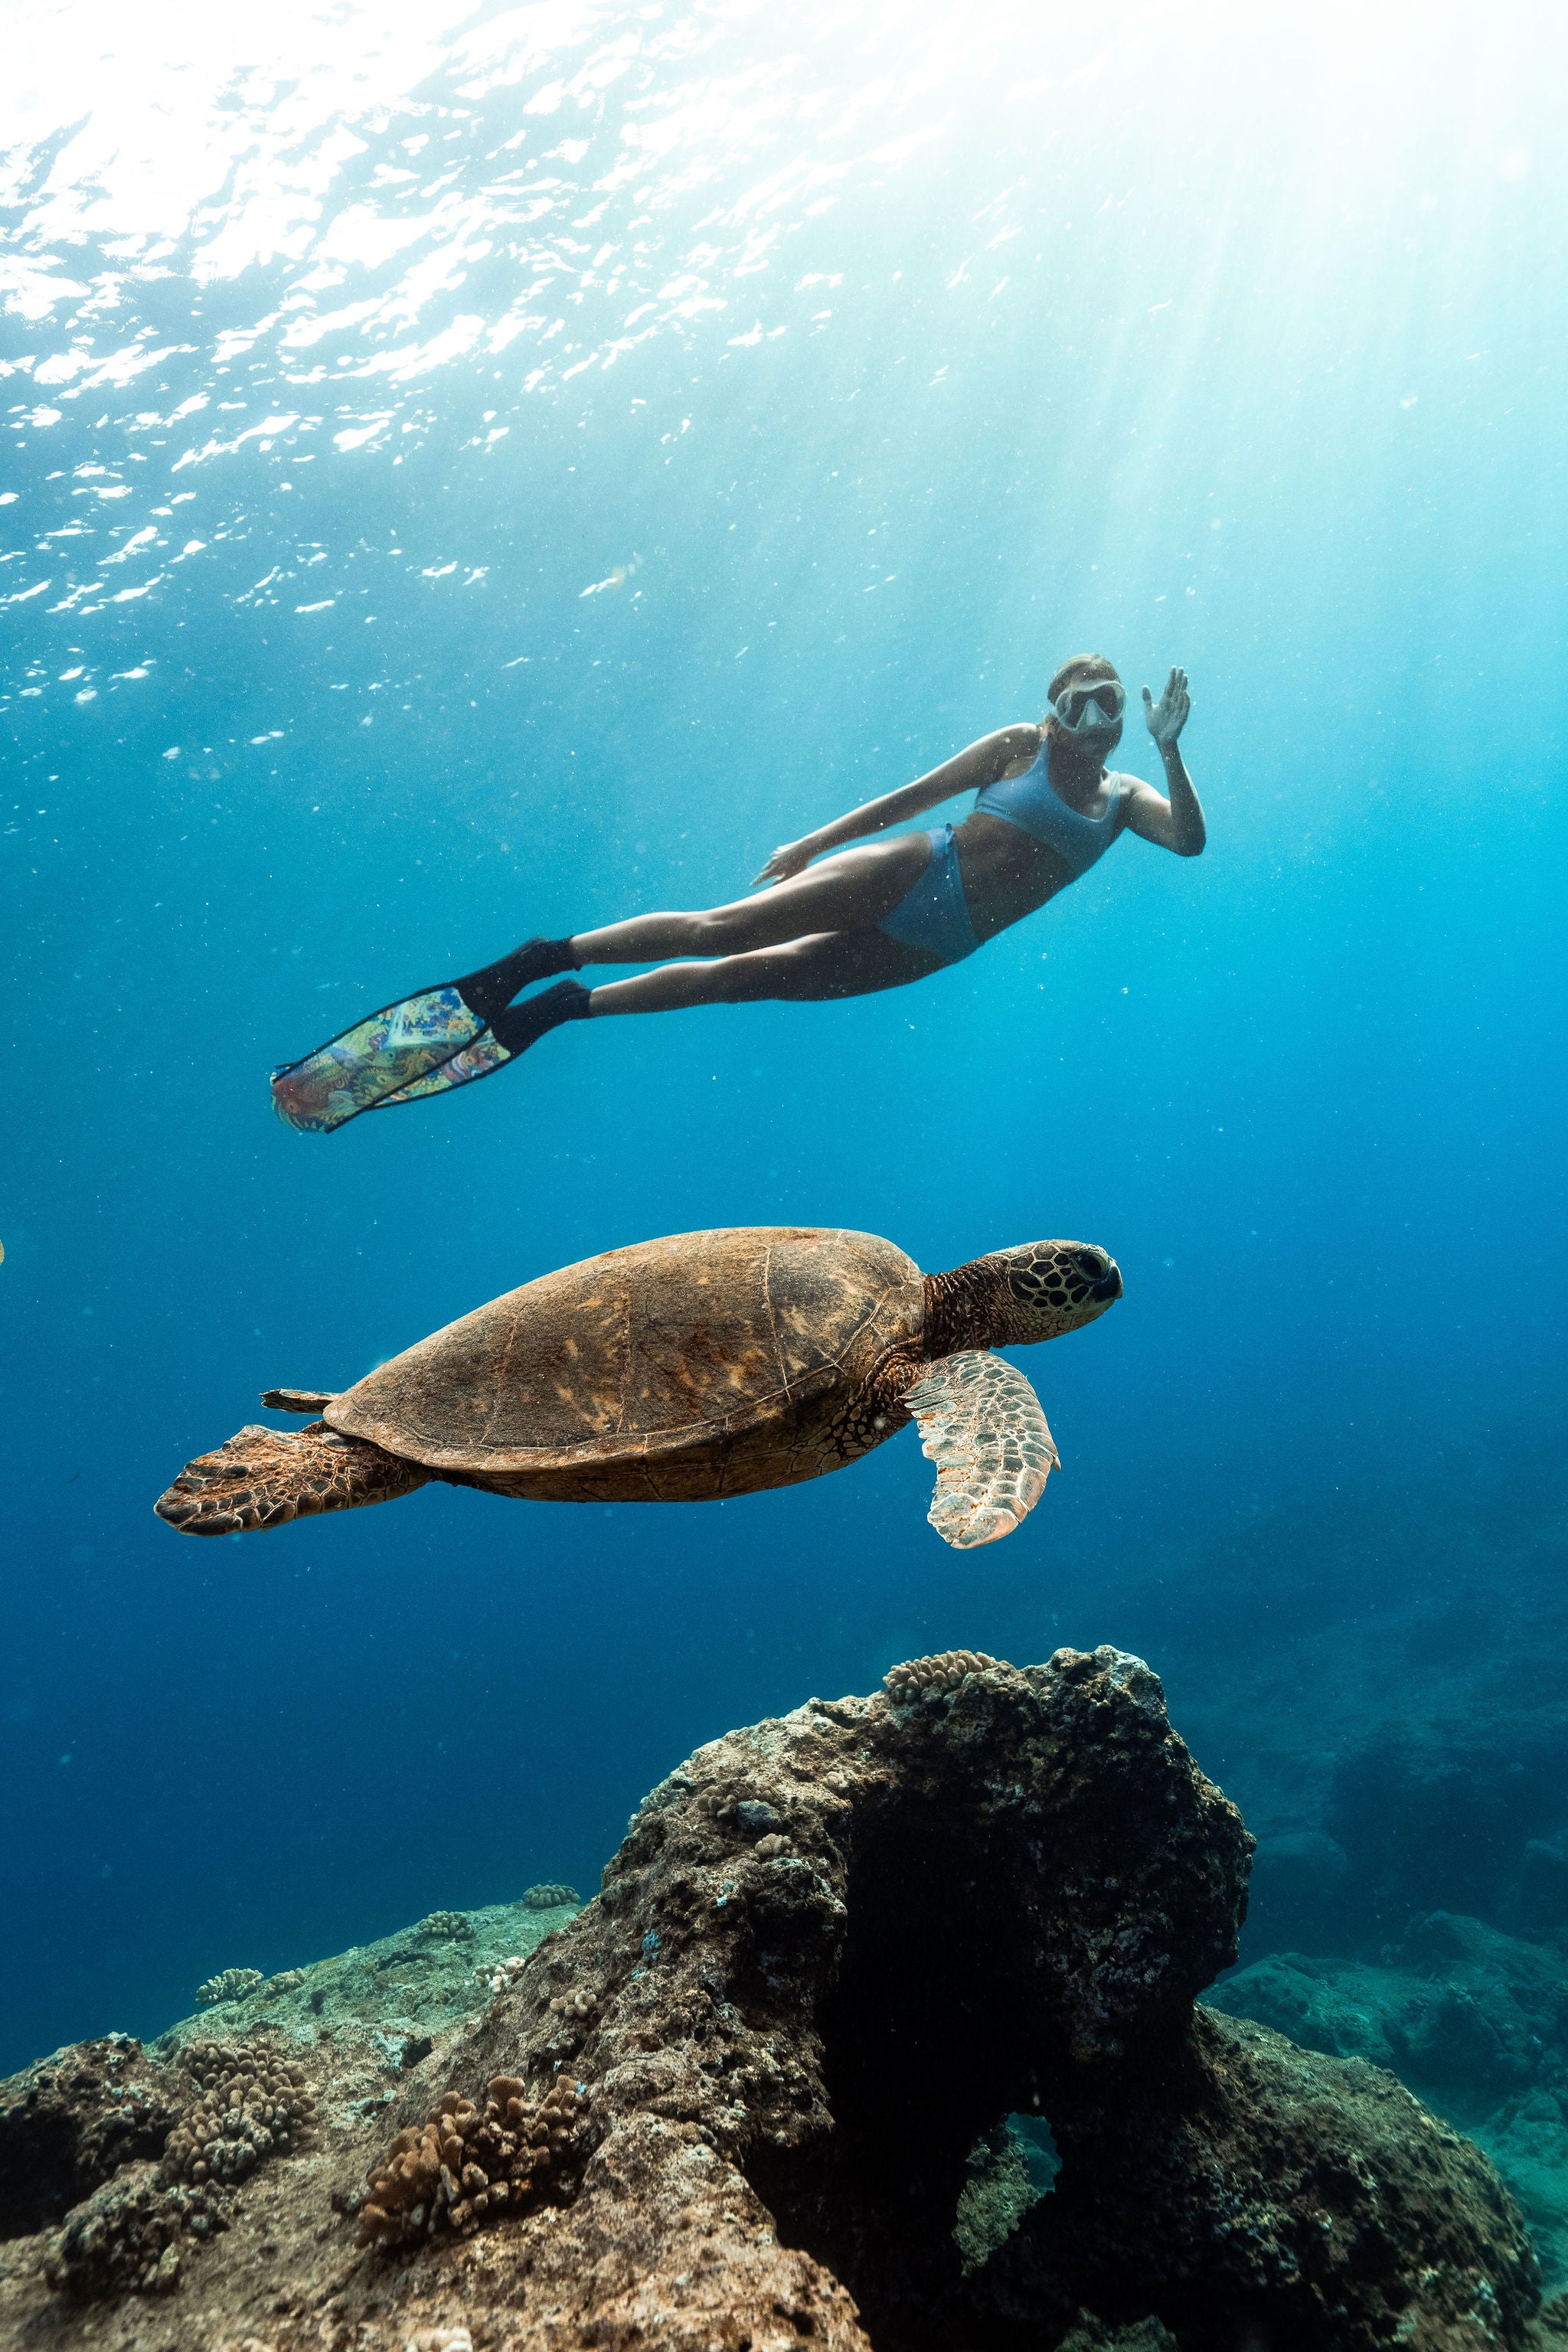 underwater woman free diving with an ocean turtle